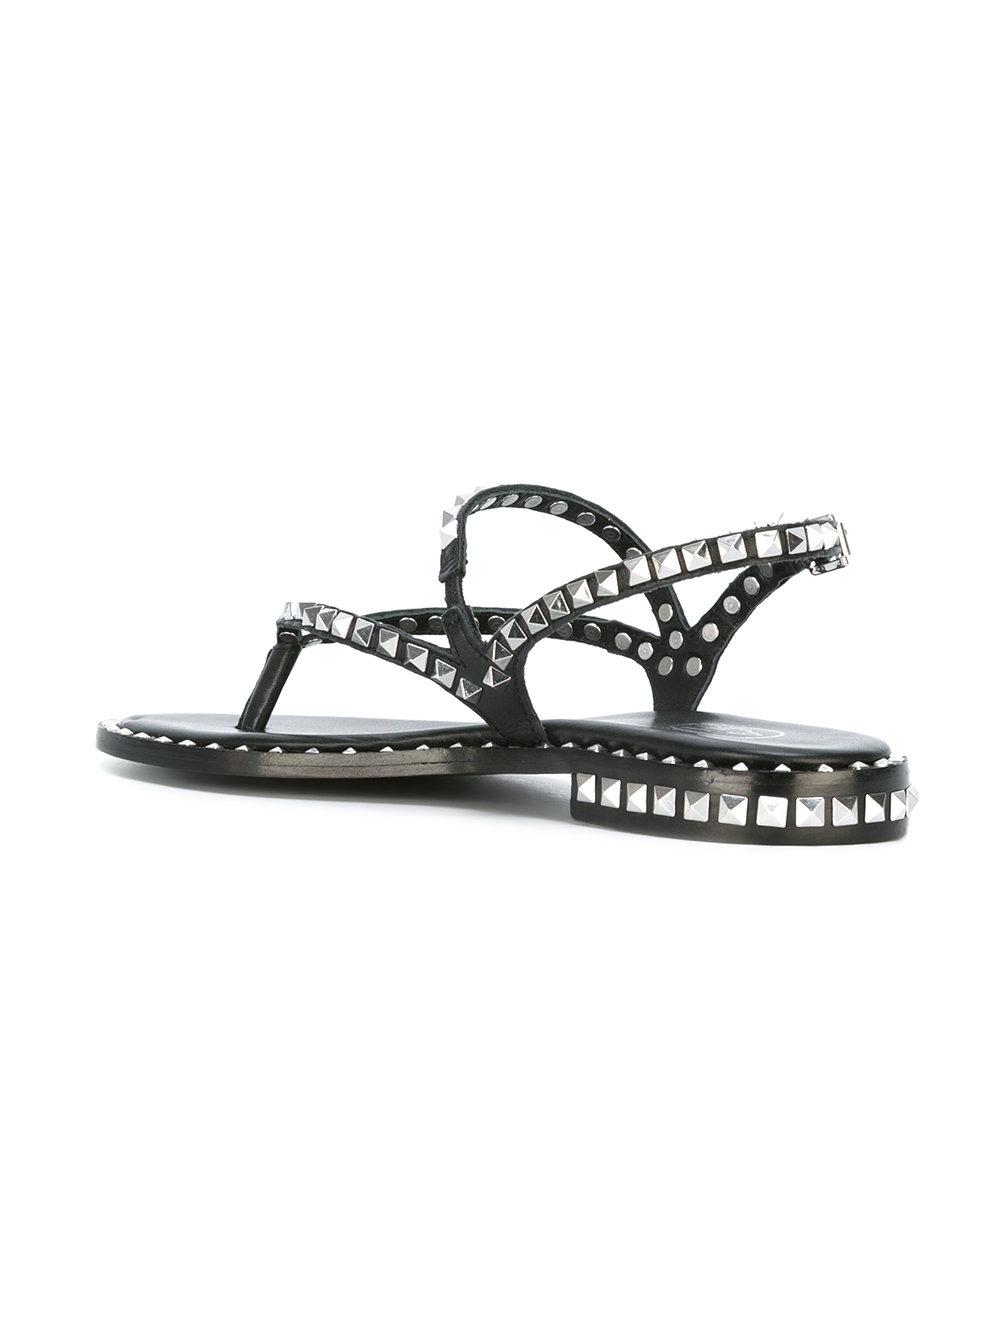 Lyst - Ash Studded Sandals in Black